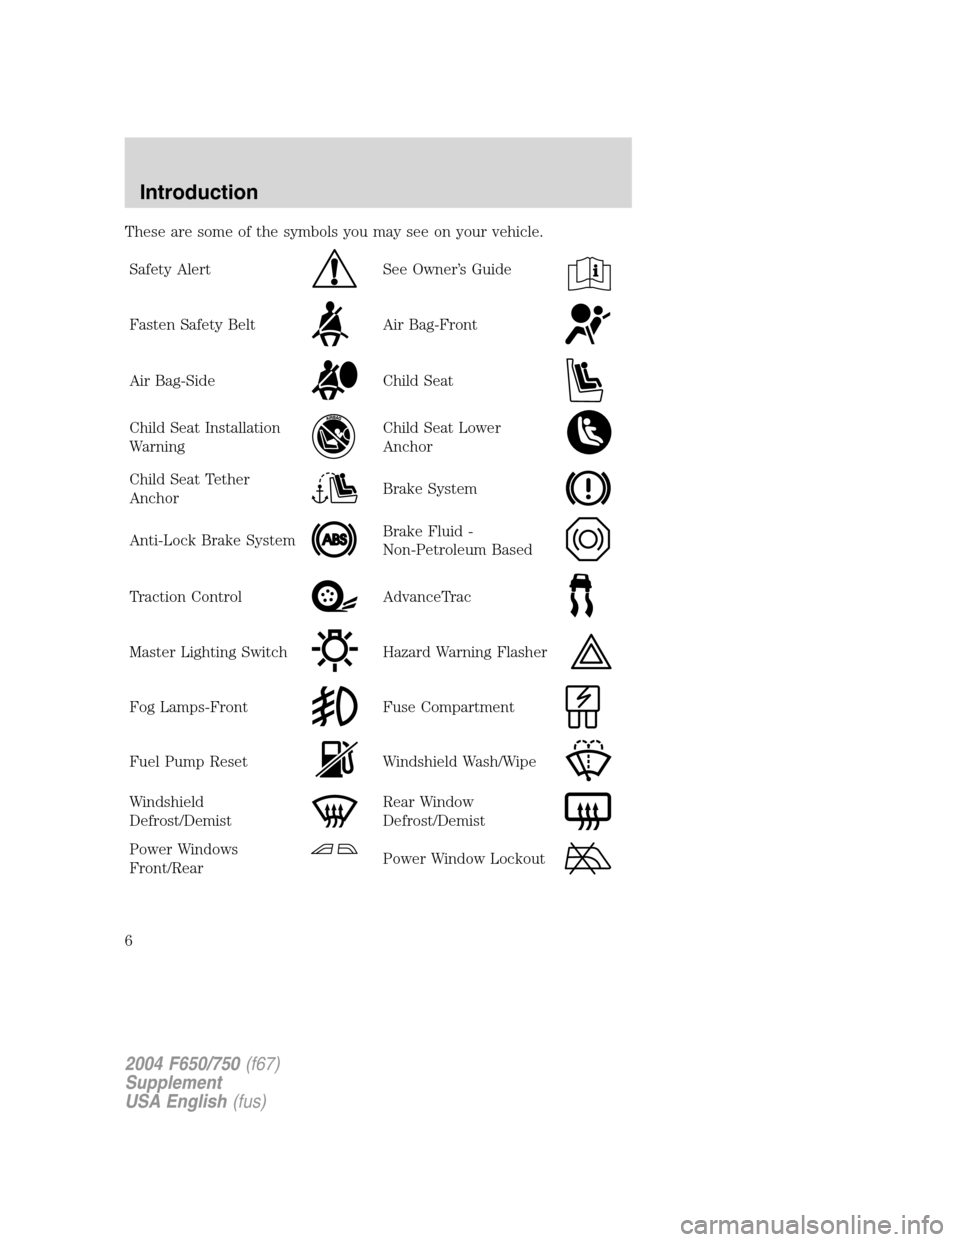 FORD F650 2004 11.G Owners Manual These are some of the symbols you may see on your vehicle.
Safety Alert
See Owner’s Guide
Fasten Safety BeltAir Bag-Front
Air Bag-SideChild Seat
Child Seat Installation
WarningChild Seat Lower
Ancho